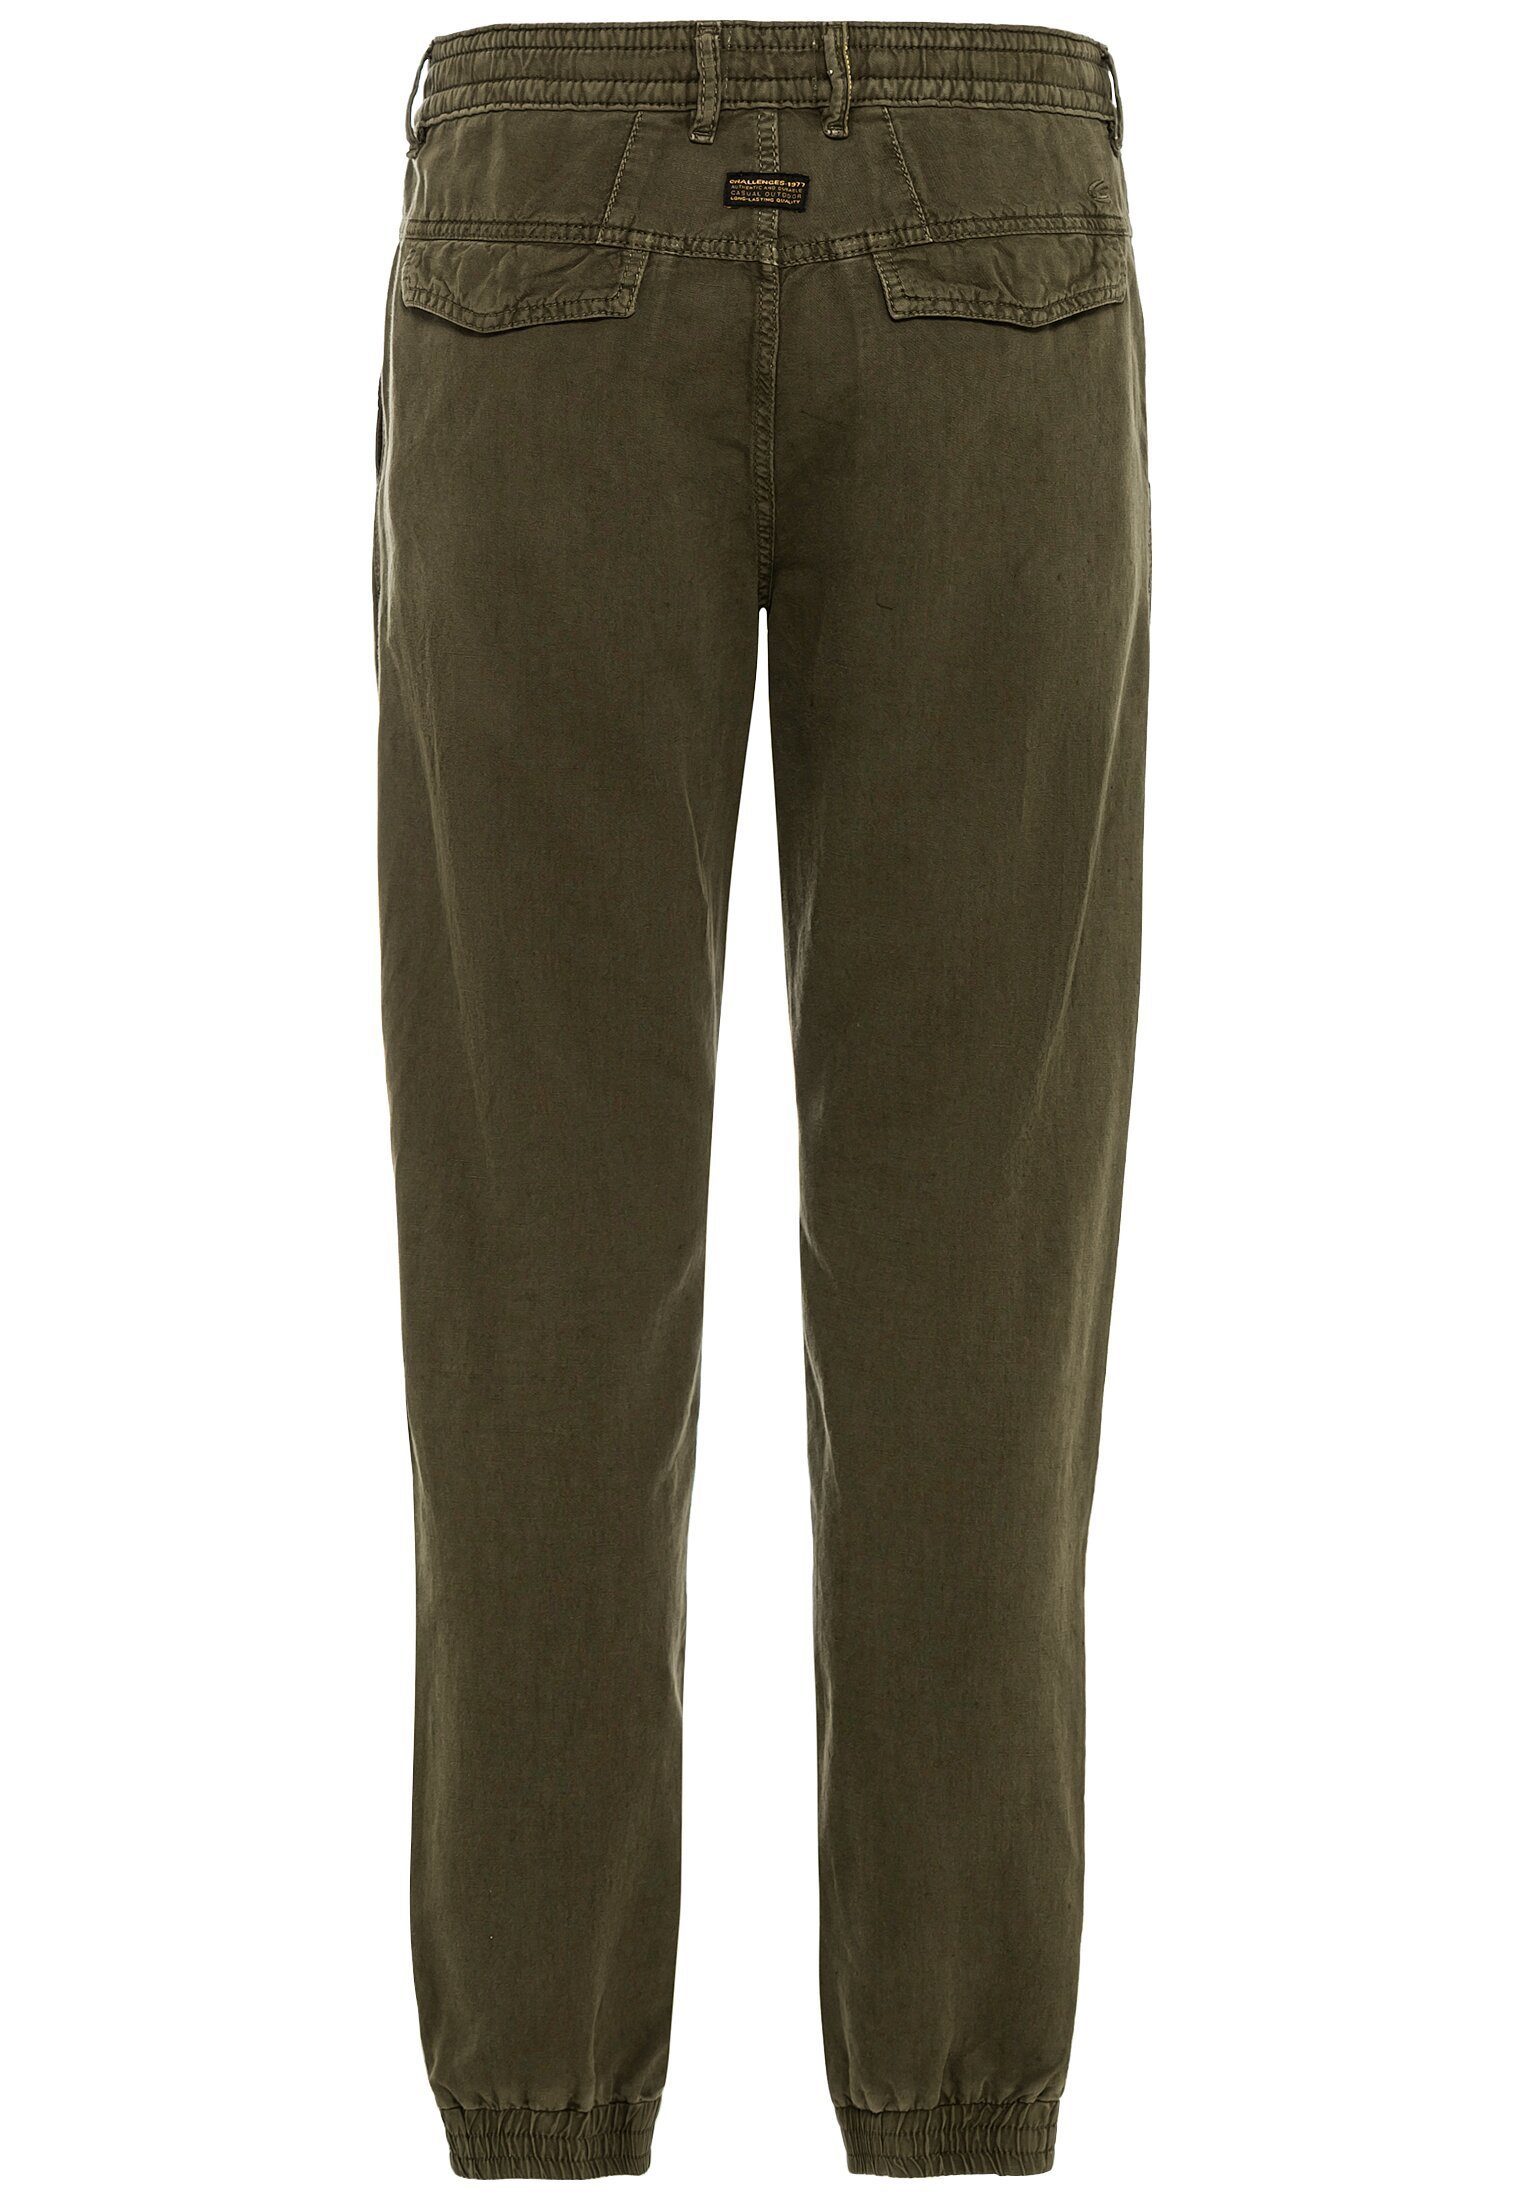 camel active Chinohose camel active Chino Herren Tapered Fit